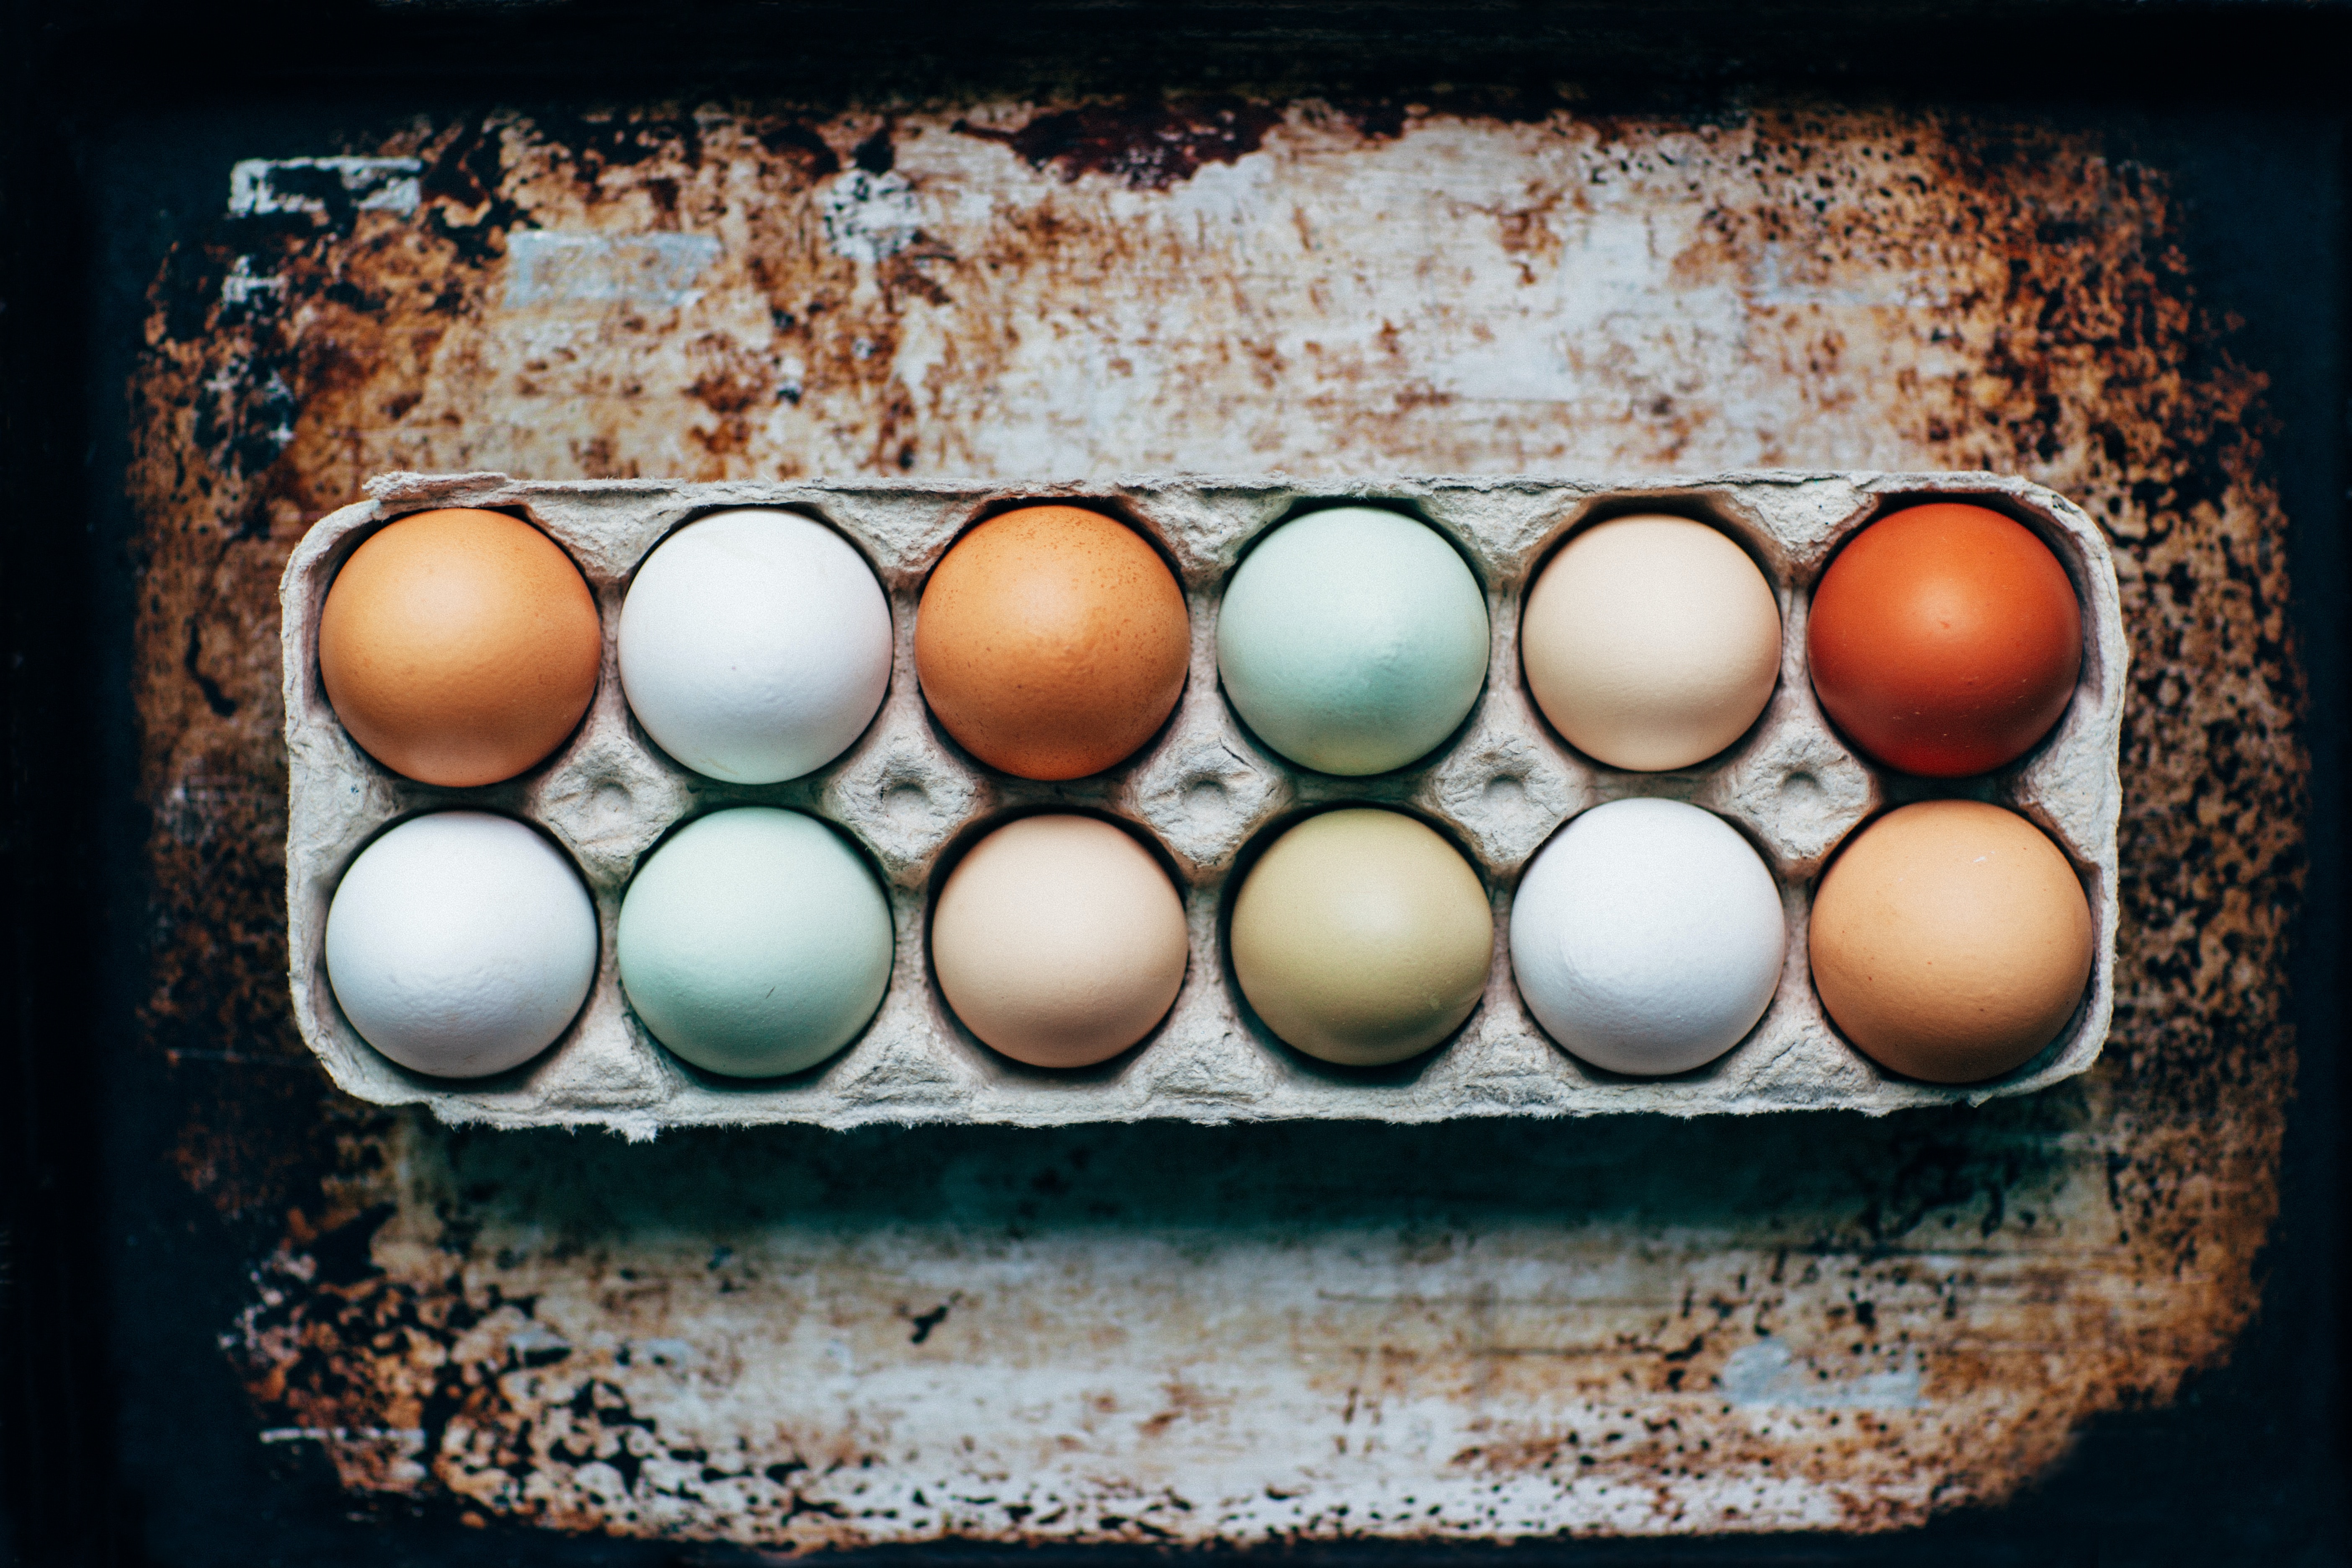 Plant-based egg project rated 'Outstanding' by Innovate UK